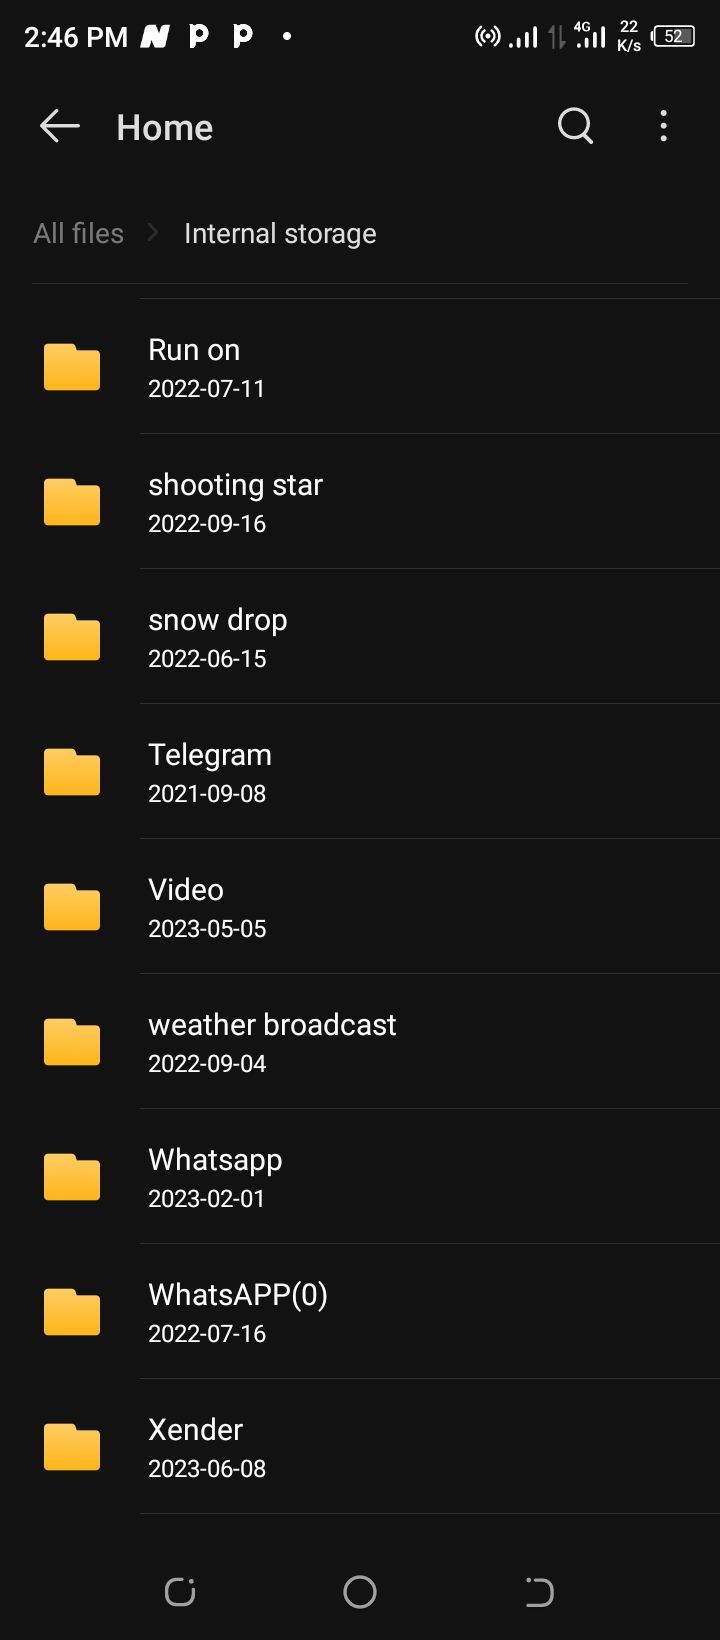 How to Save and Find Audio Files From WhatsApp